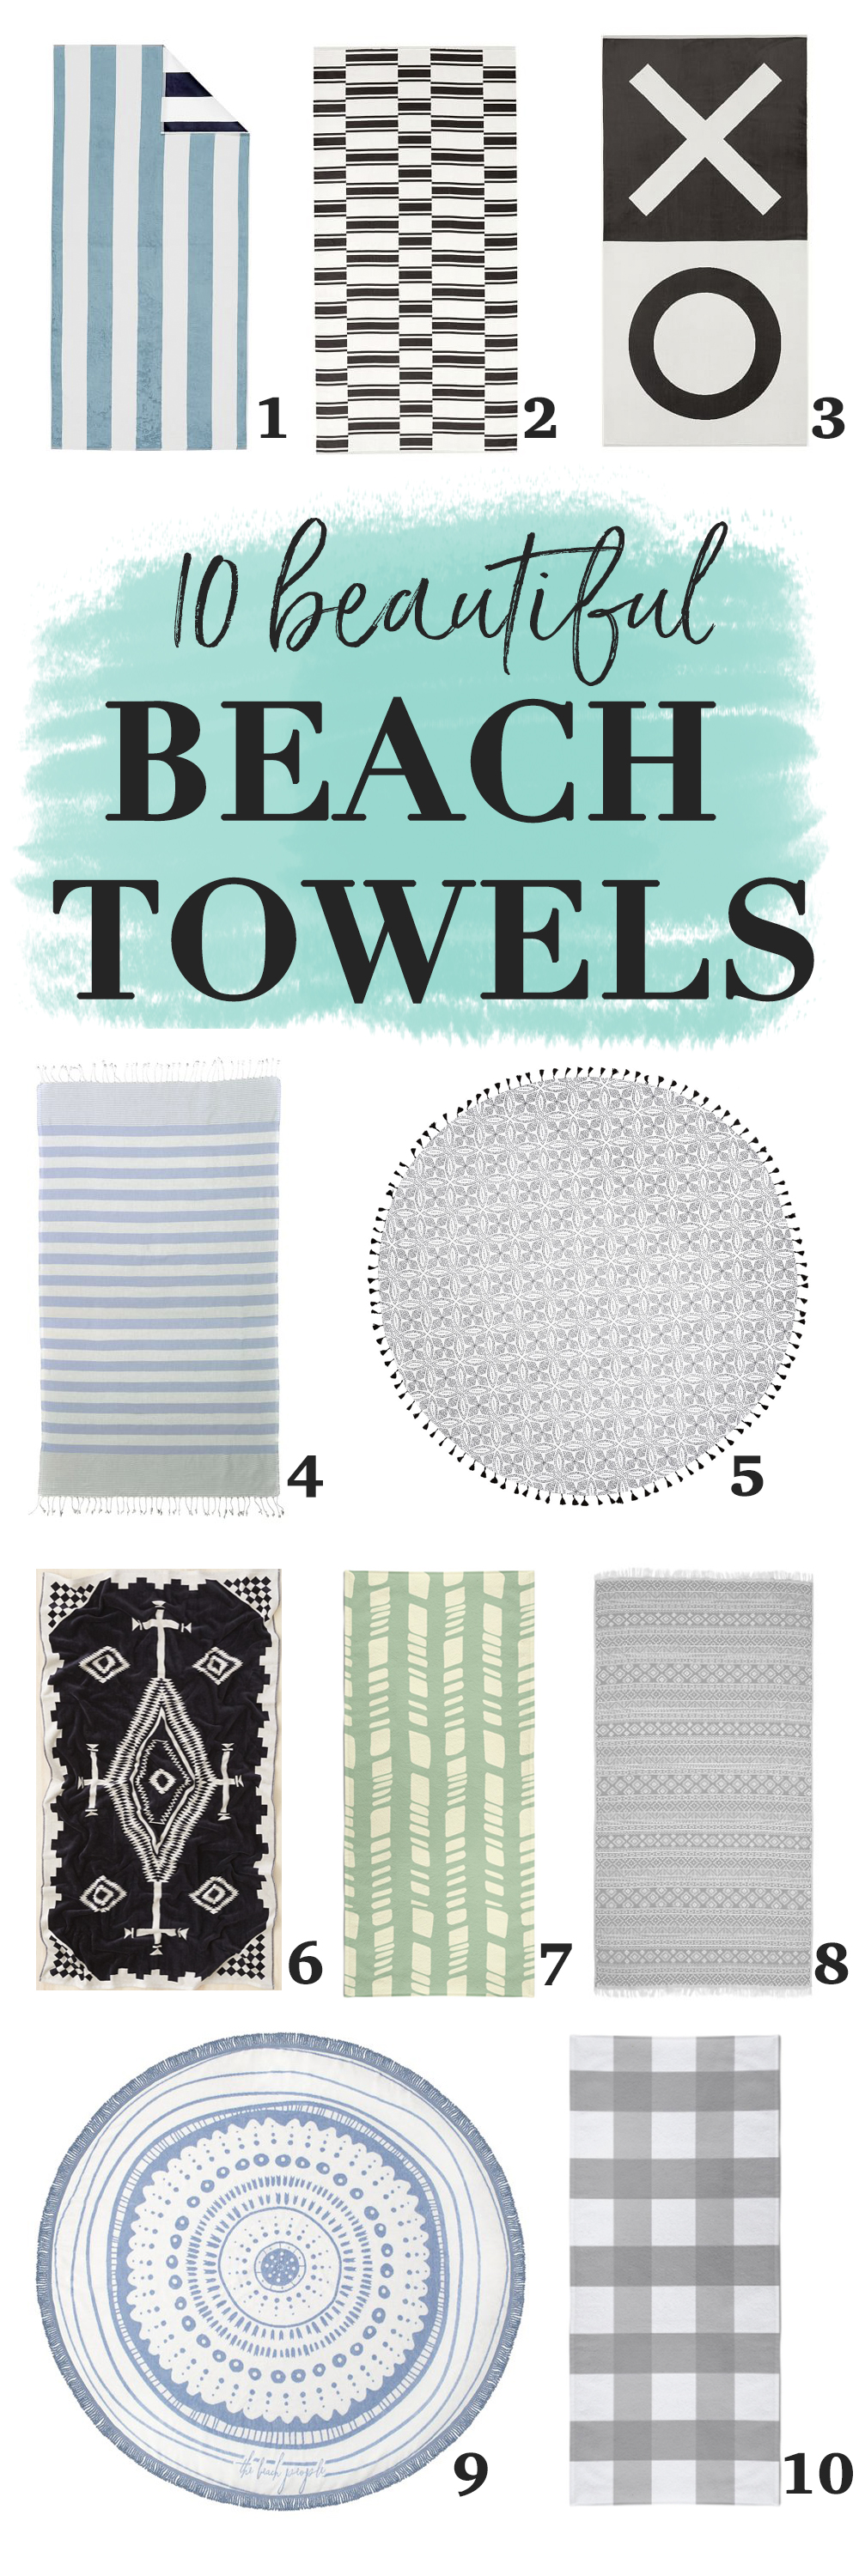 Who knew beach towels came in so many gorgeous designs?!? #beachtowels #towels #homedecor #homegoods #bathtowels